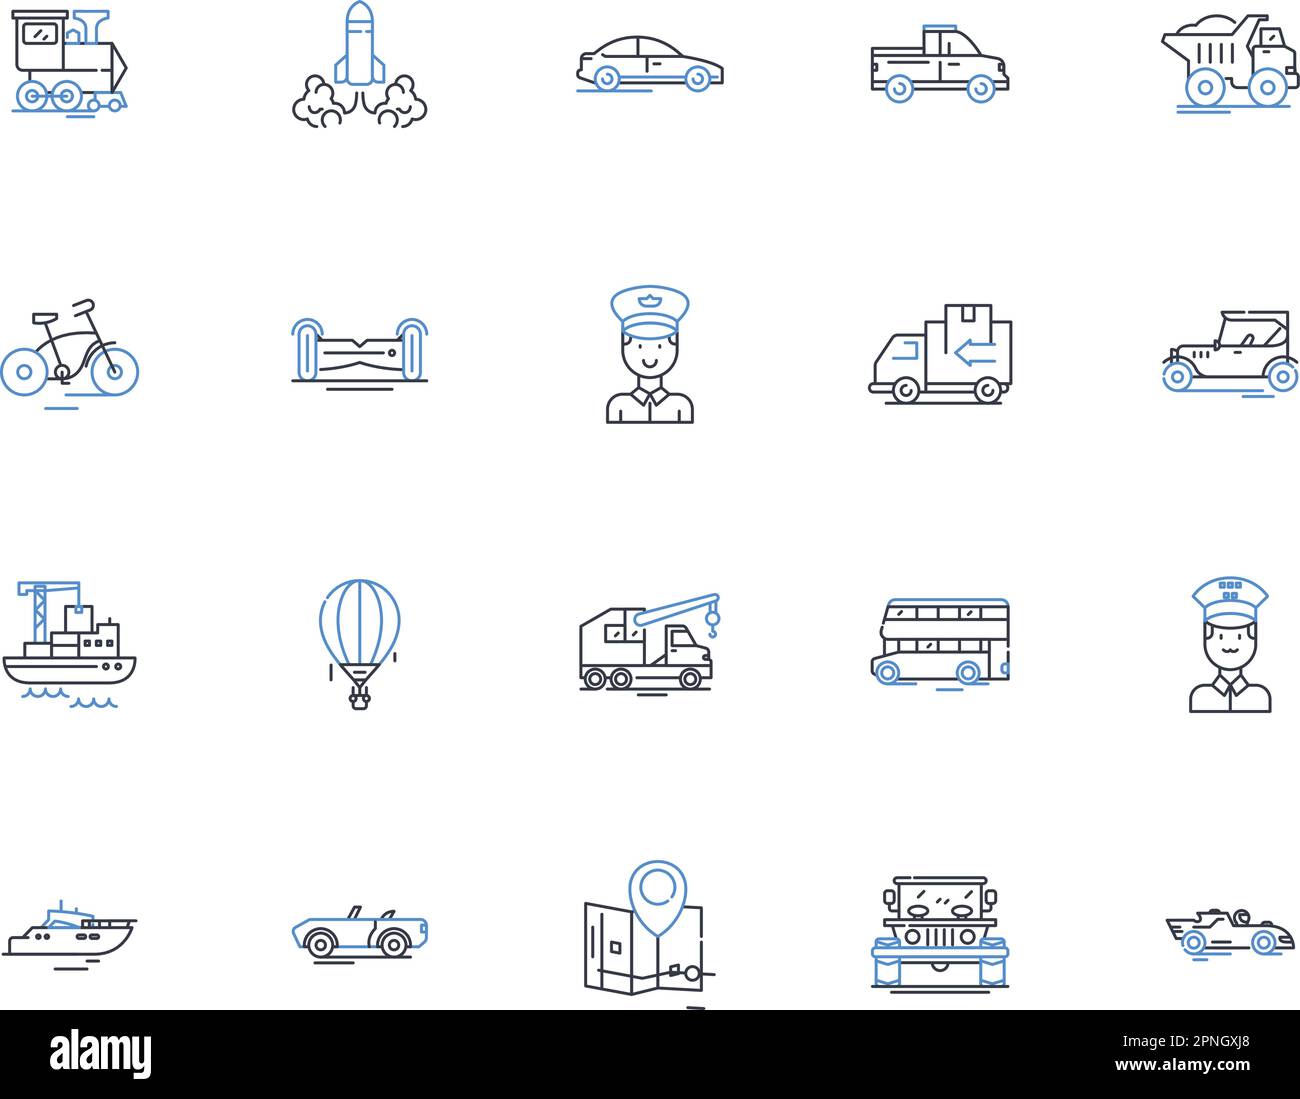 Haulage transfer line icons collection. Logistics, Transportation, Trucking, Shipment, Delivery, Freight, Transfer vector and linear illustration Stock Vector